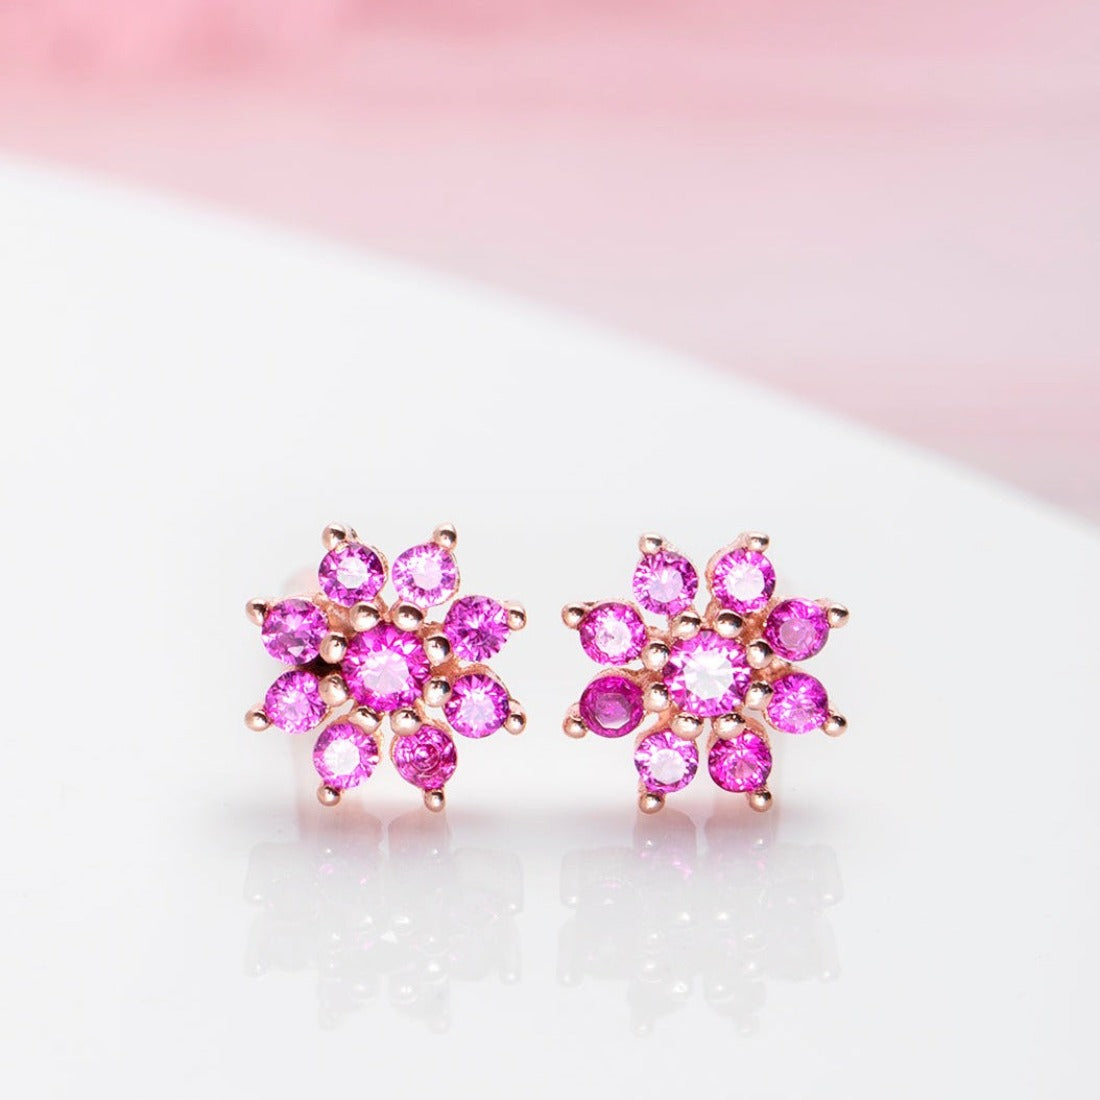 Rosegold Blooms 925 Sterling Silver Floral Earrings with a Touch of Elegance